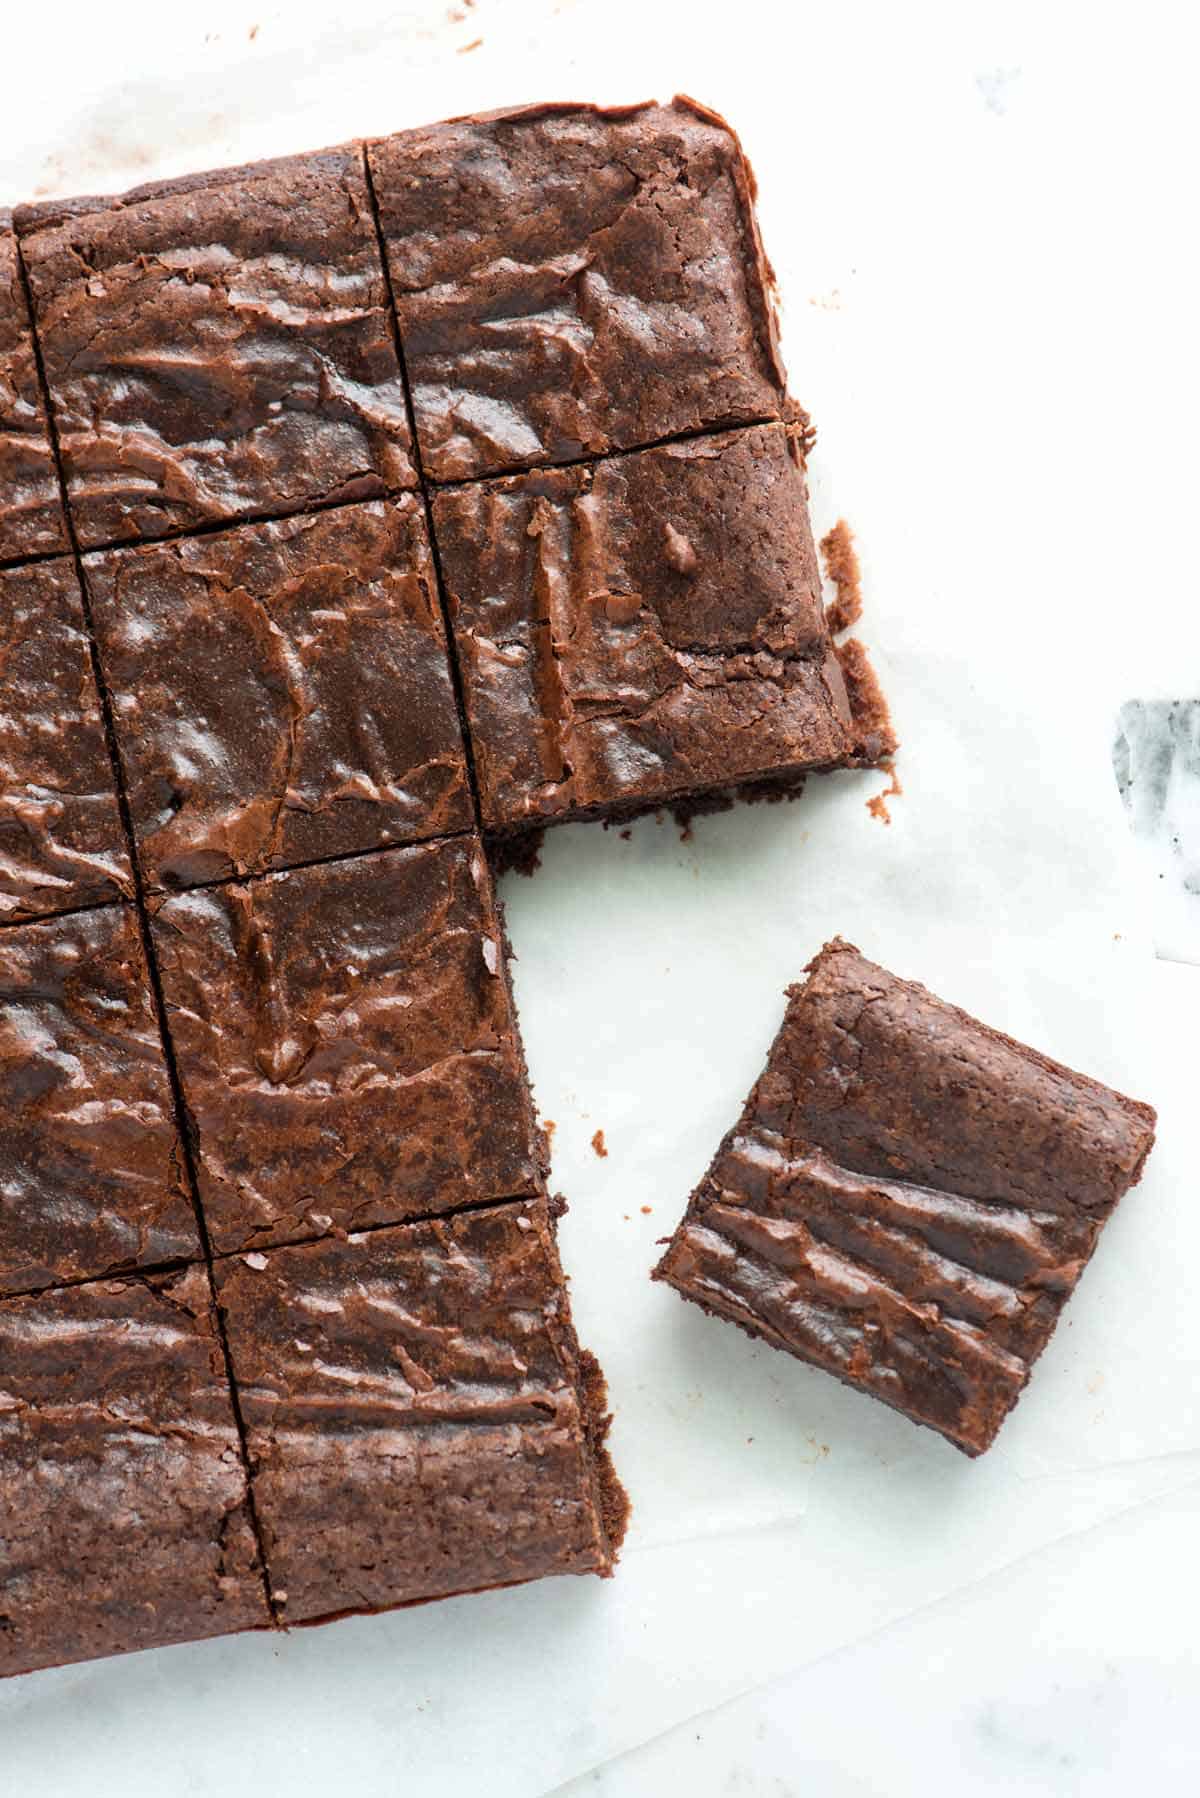 Easy, Fudgy Brownies Recipe from Scratch